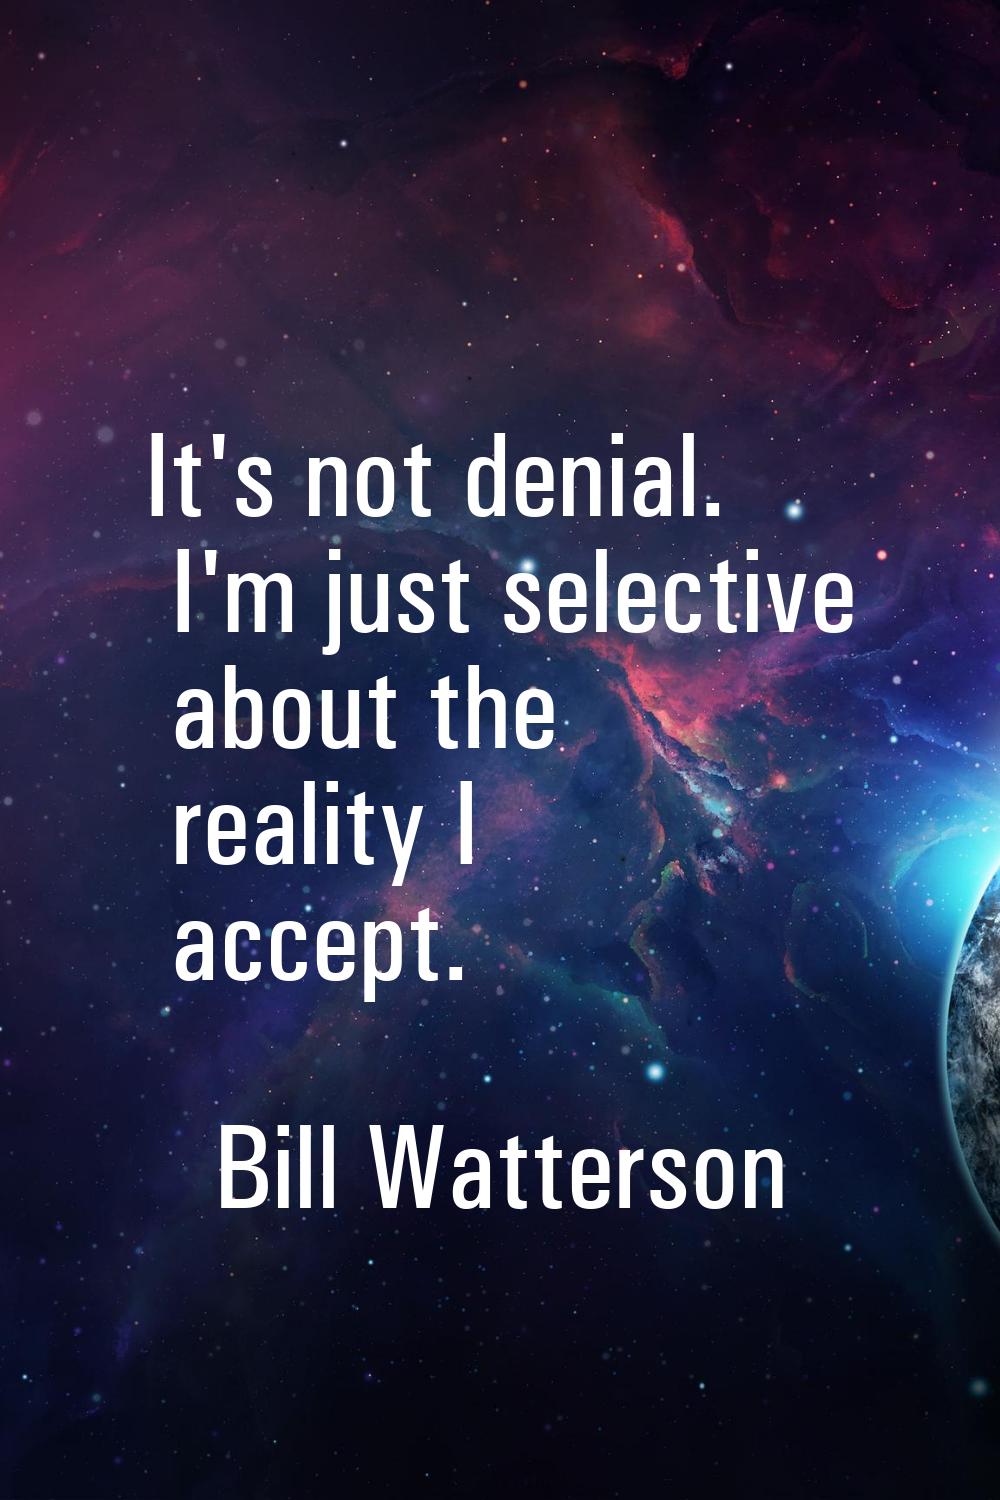 It's not denial. I'm just selective about the reality I accept.